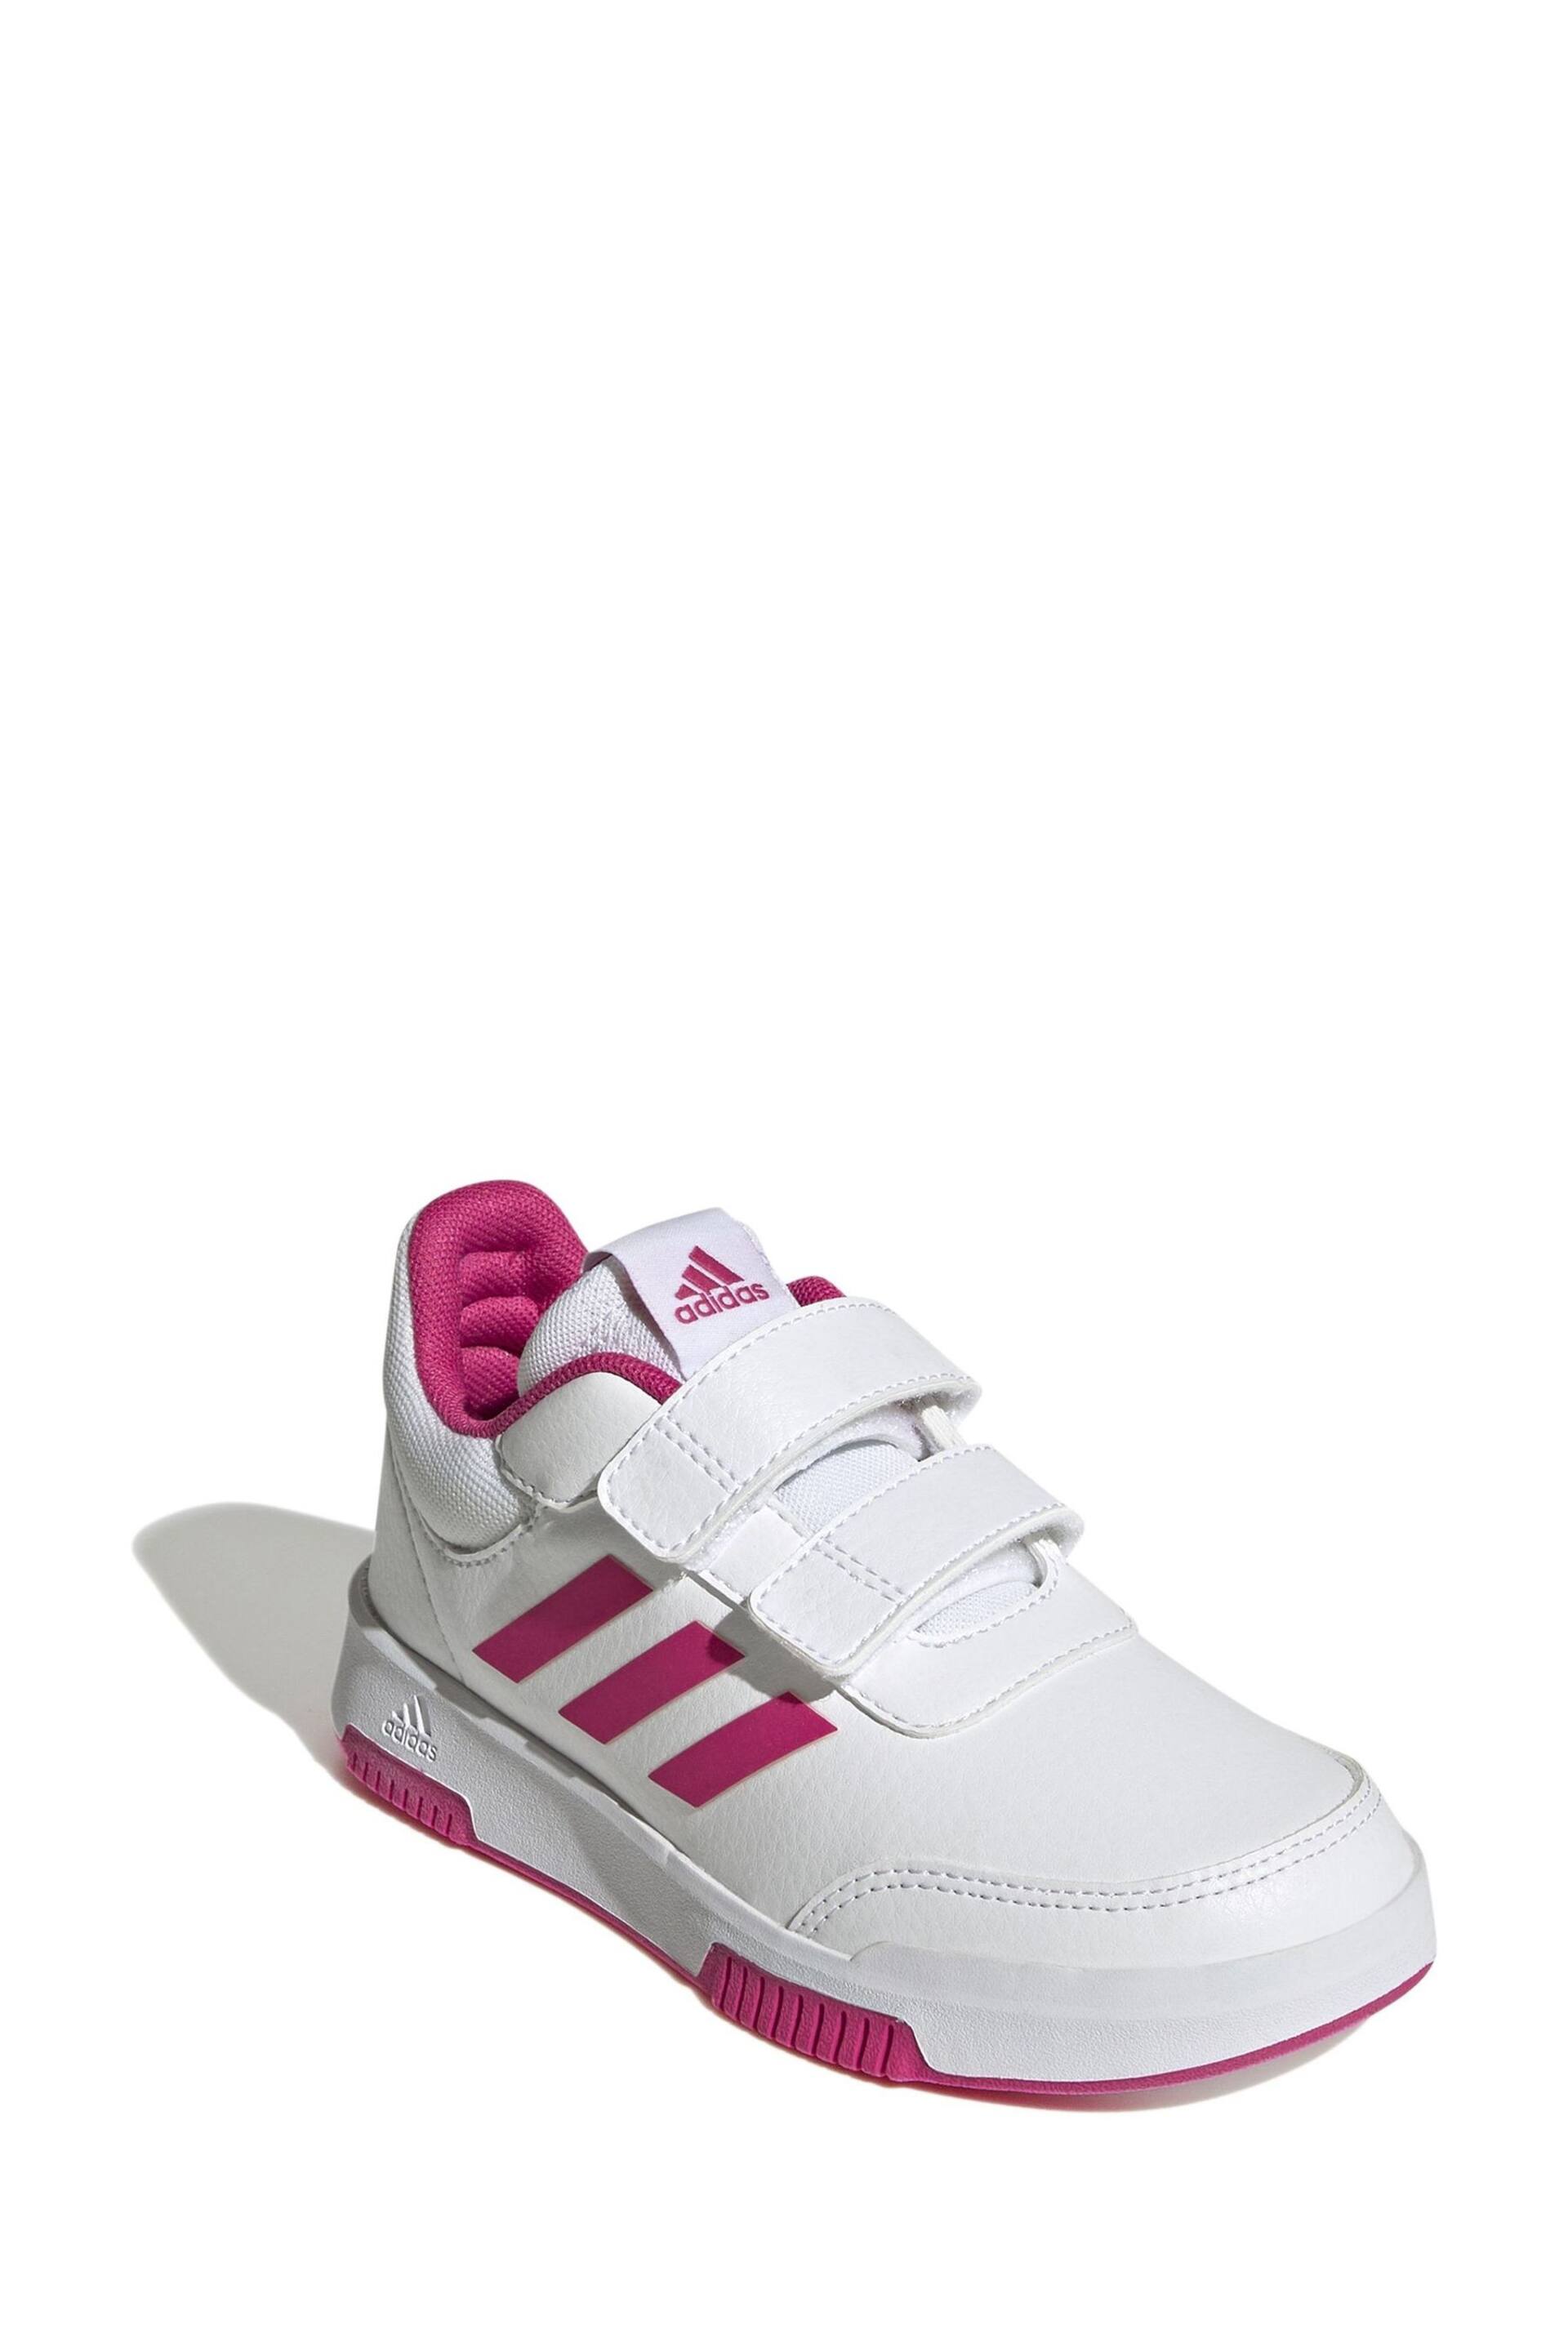 adidas White/Pink Tensaur Hook and Loop Shoes - Image 2 of 9